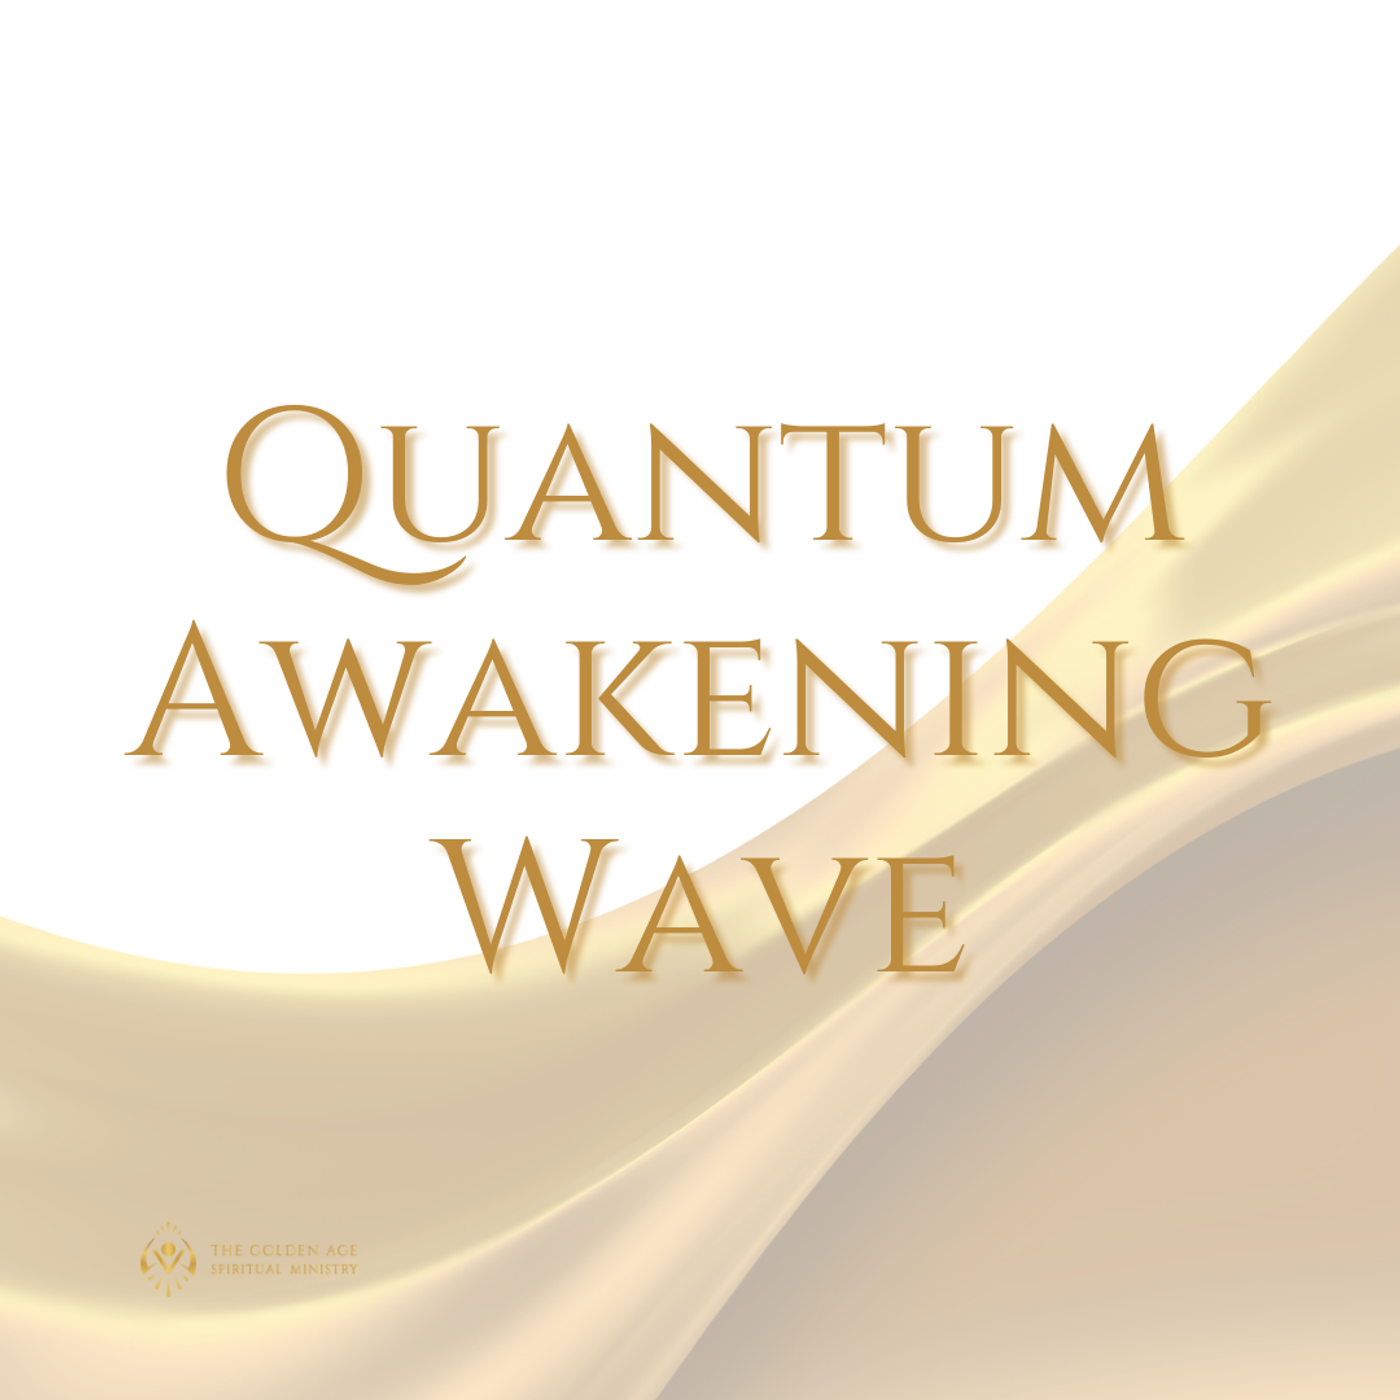 Quantum Awakening Wave Episode 11: Improve your connection with others as you awake!